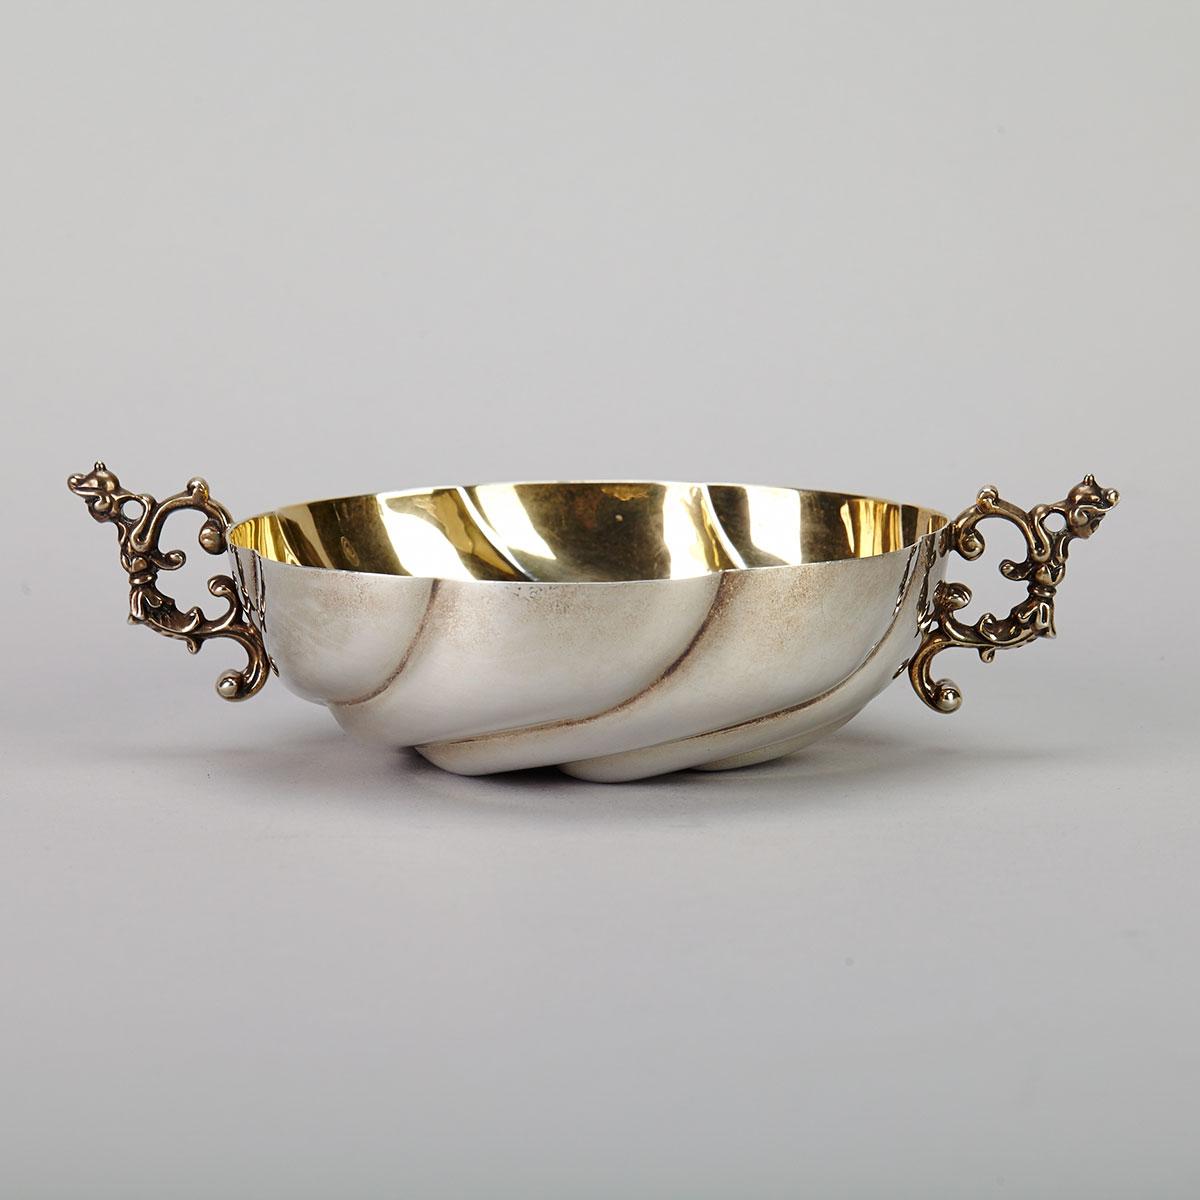 Mexican Silver Two-Handled Bowl, Tane Orfevres, Mexico City, mid-20th century